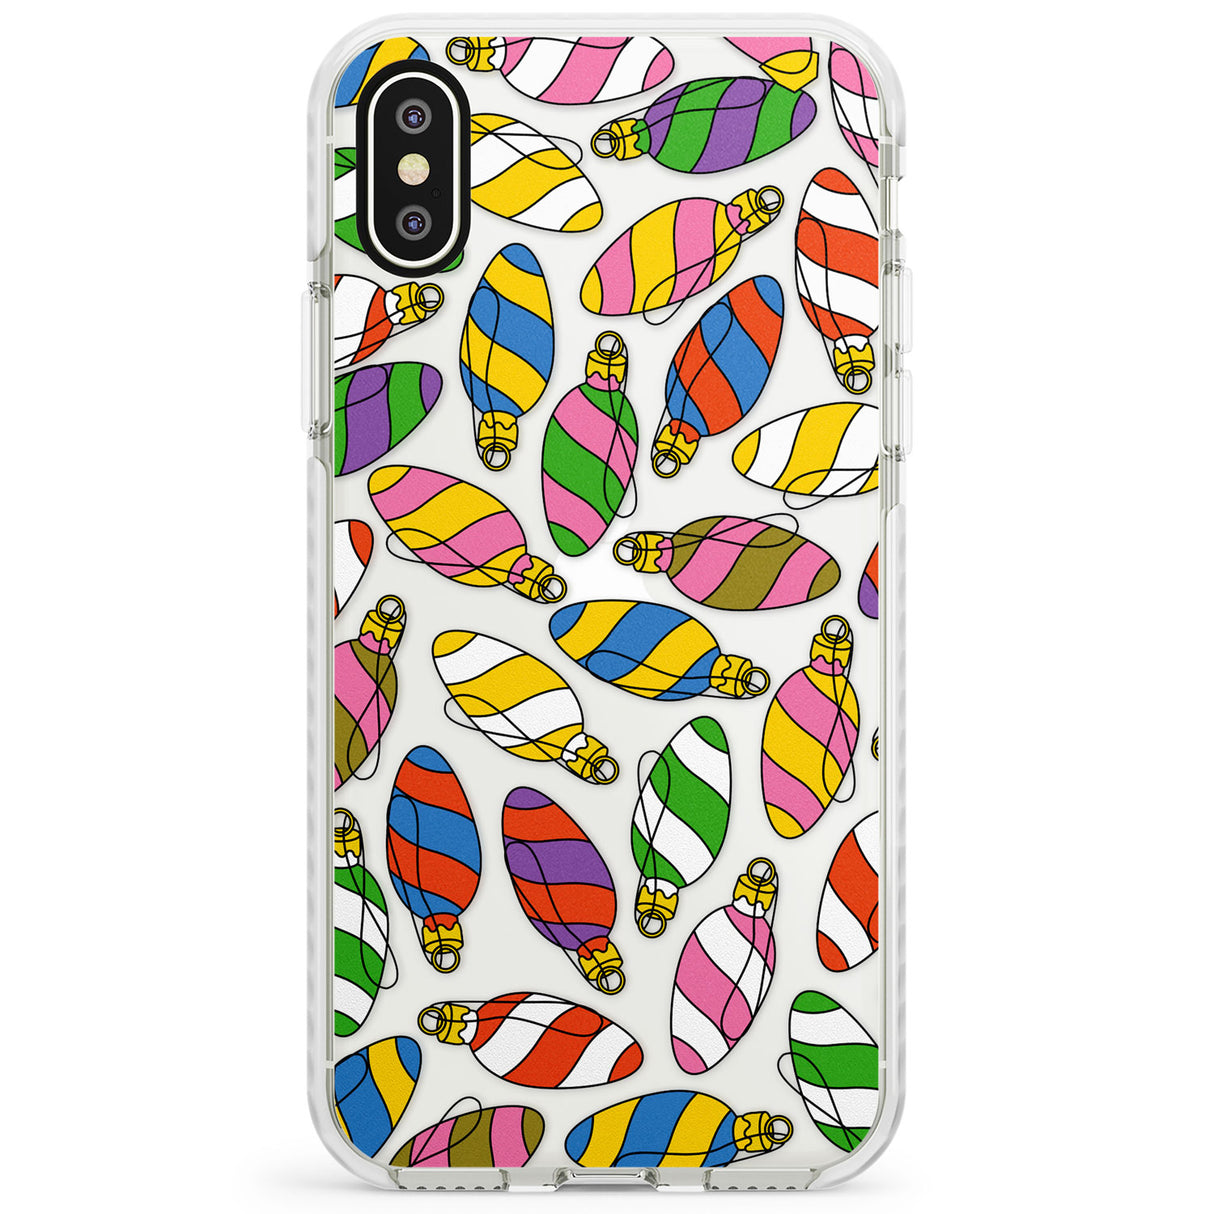 Colourful Holiday Ornaments Impact Phone Case for iPhone X XS Max XR